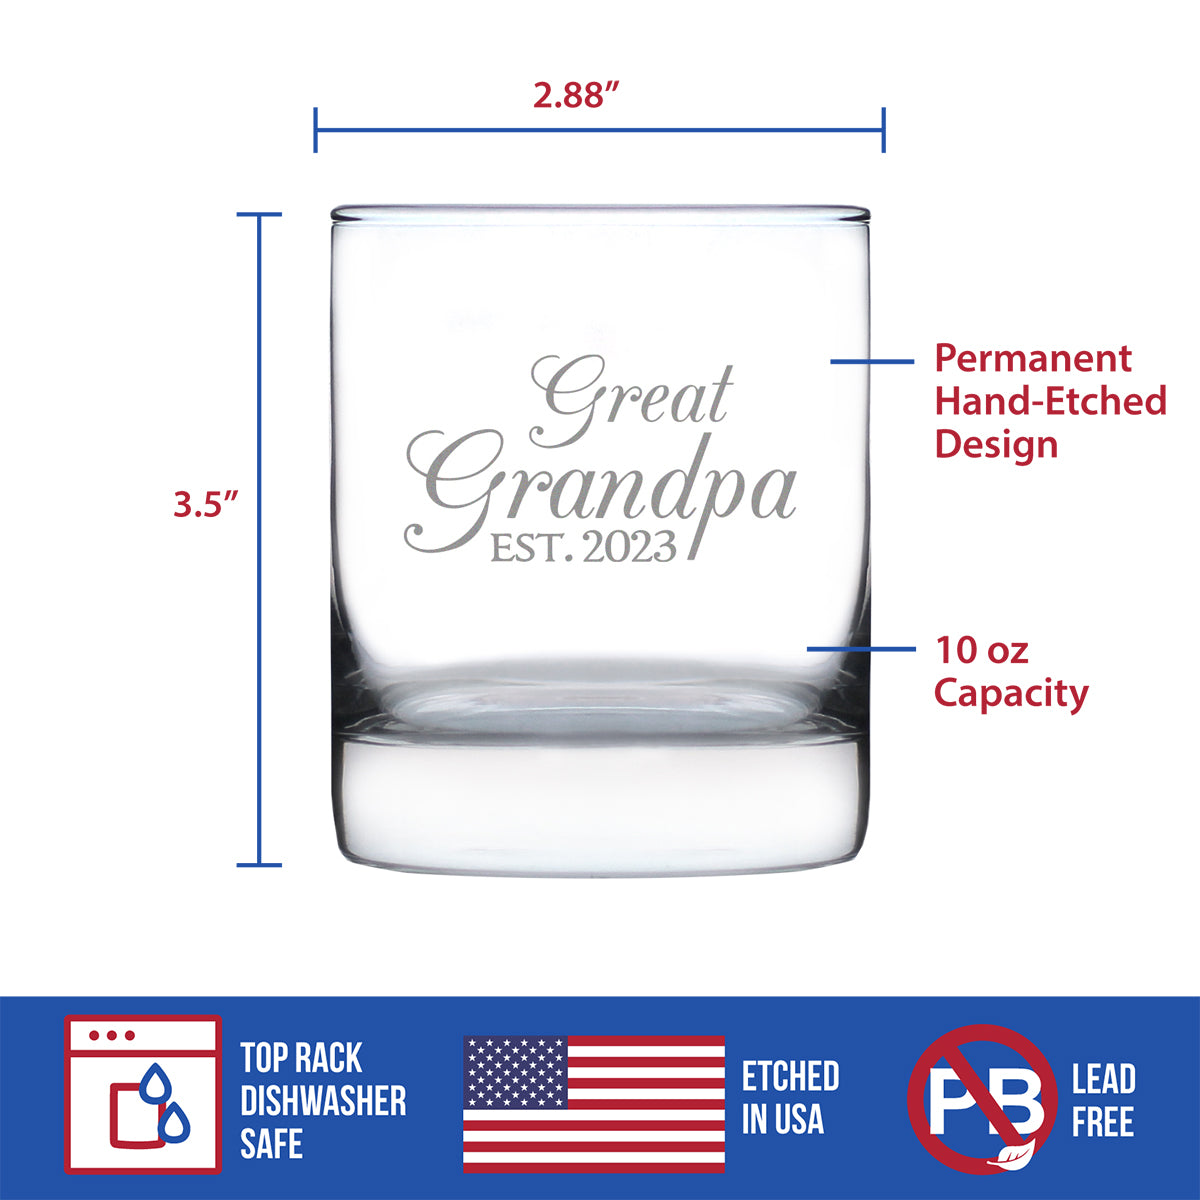 Great Grandpa Est 2023 - New Great Grandfather Whiskey Rocks Glass Gift for First Time Great Grandparents - Decorative 10.25 Oz Glasses